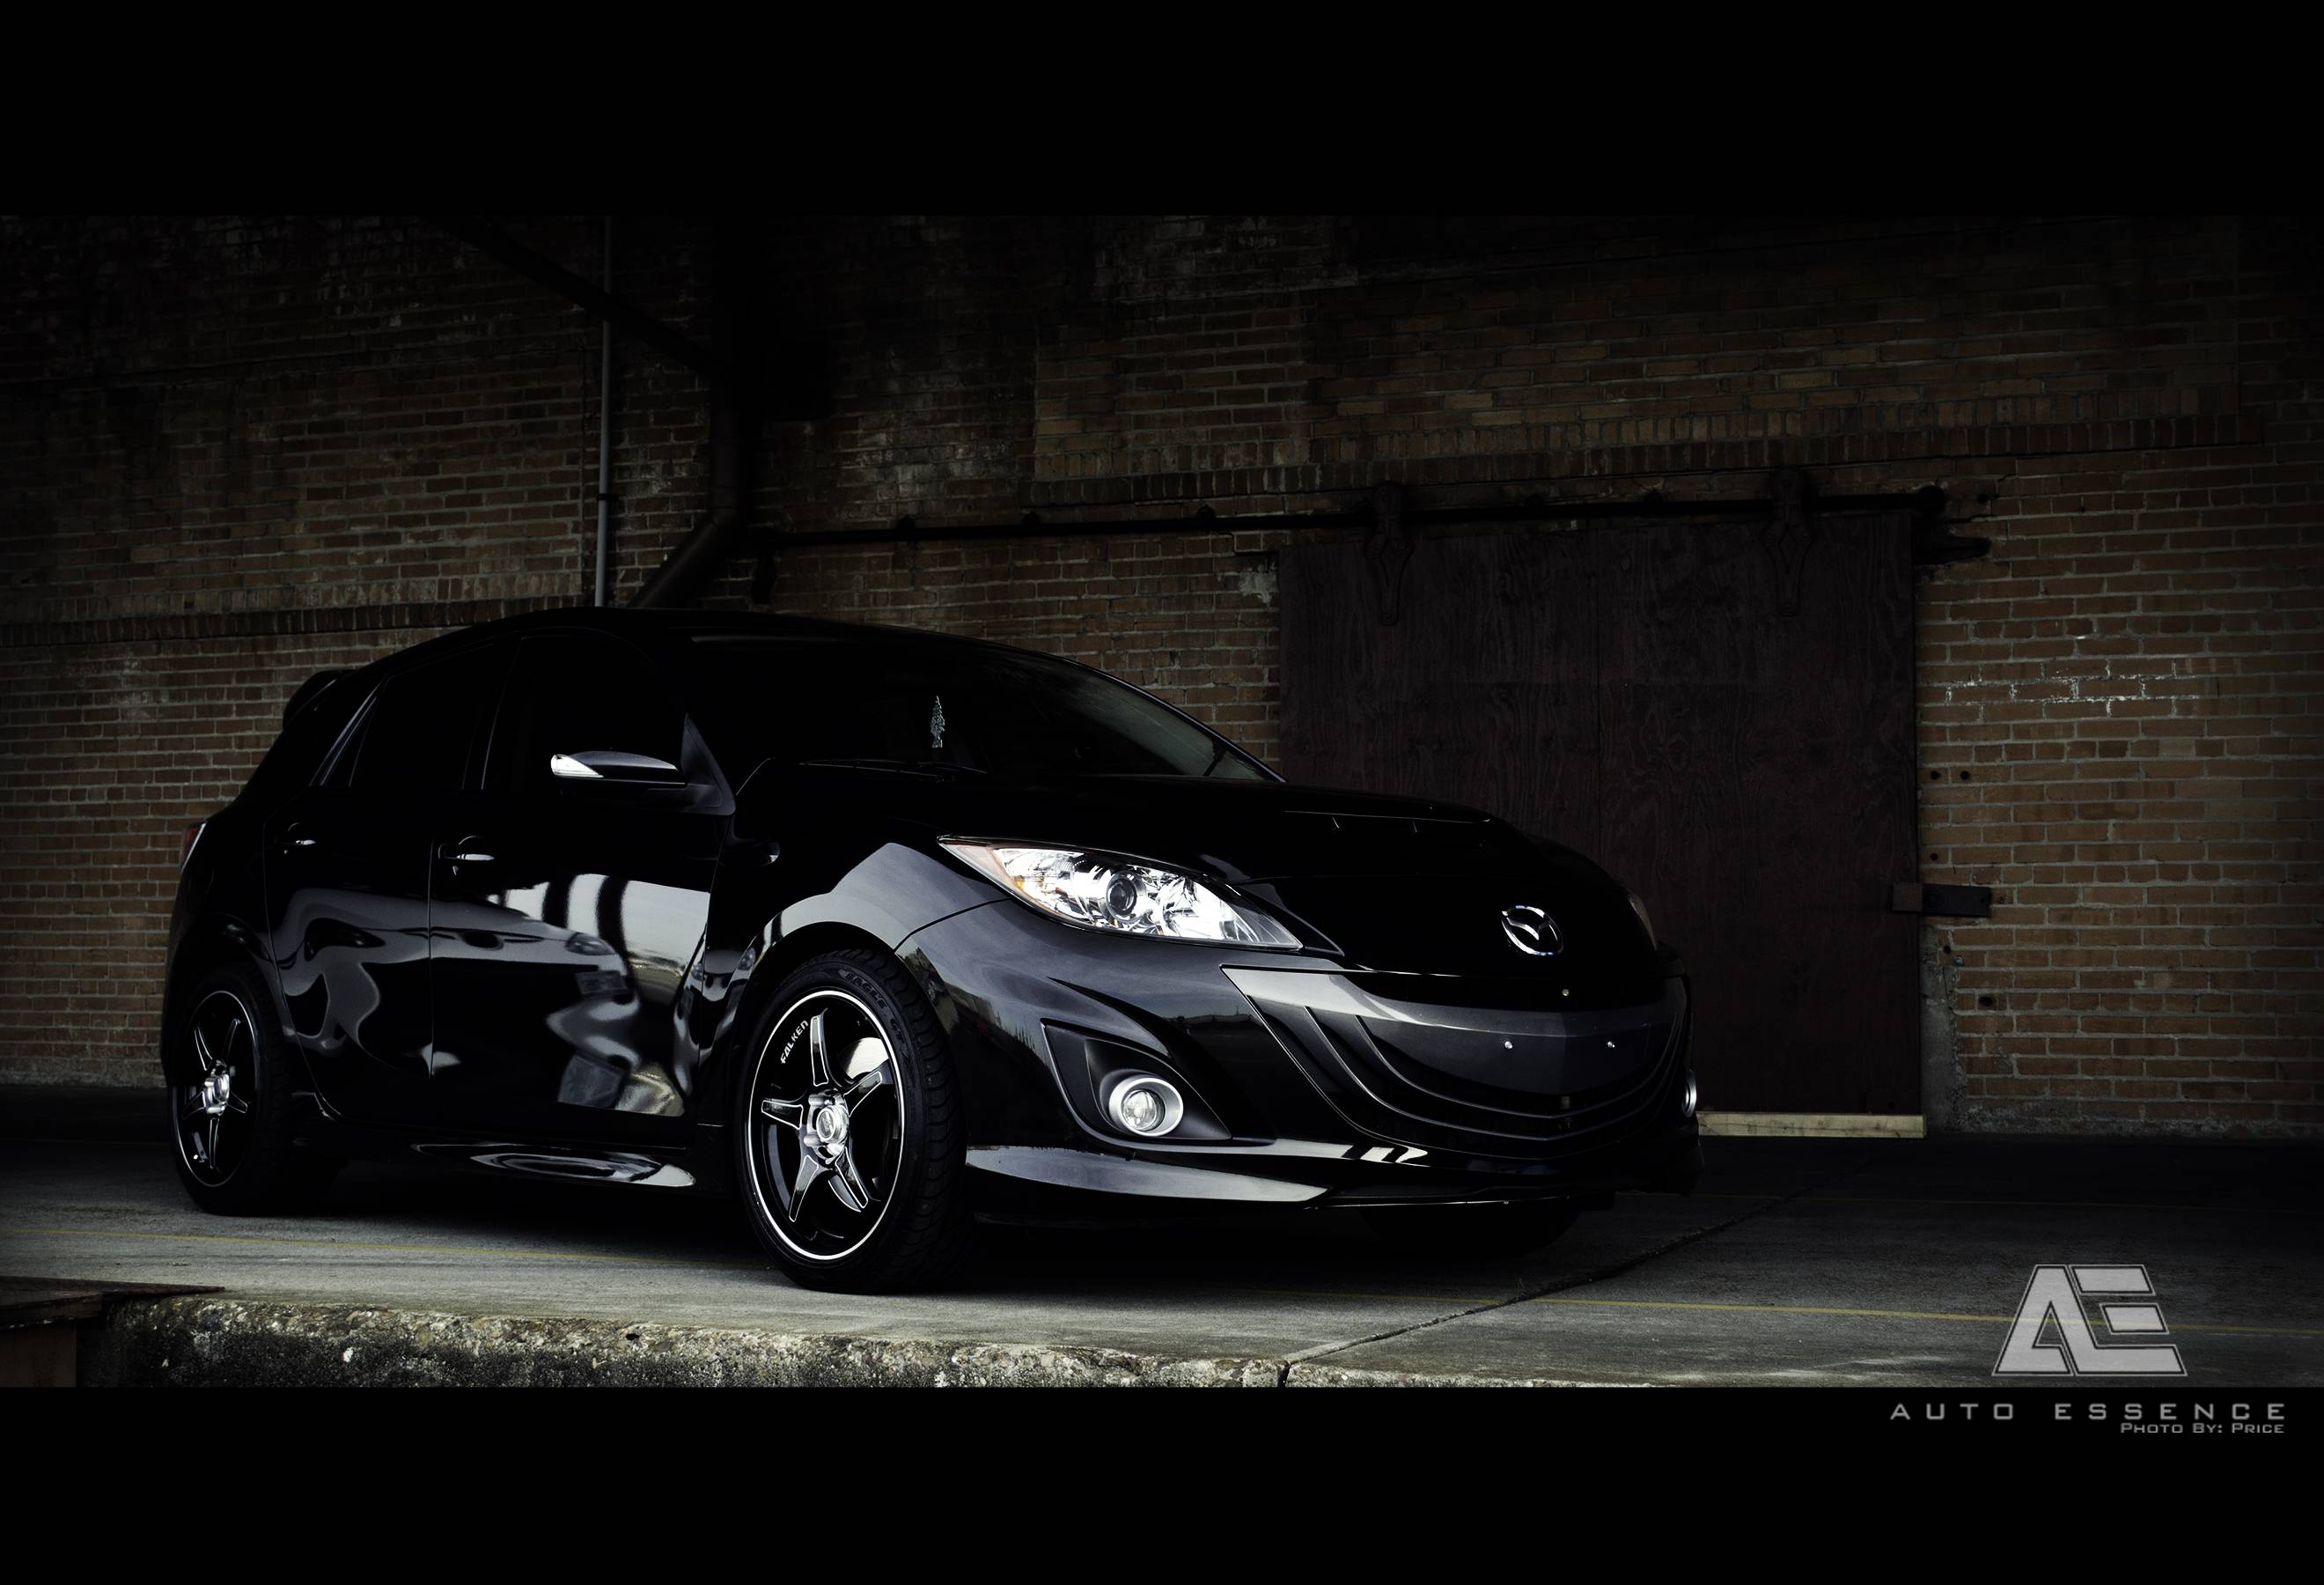 Mazdaspeed3 about model